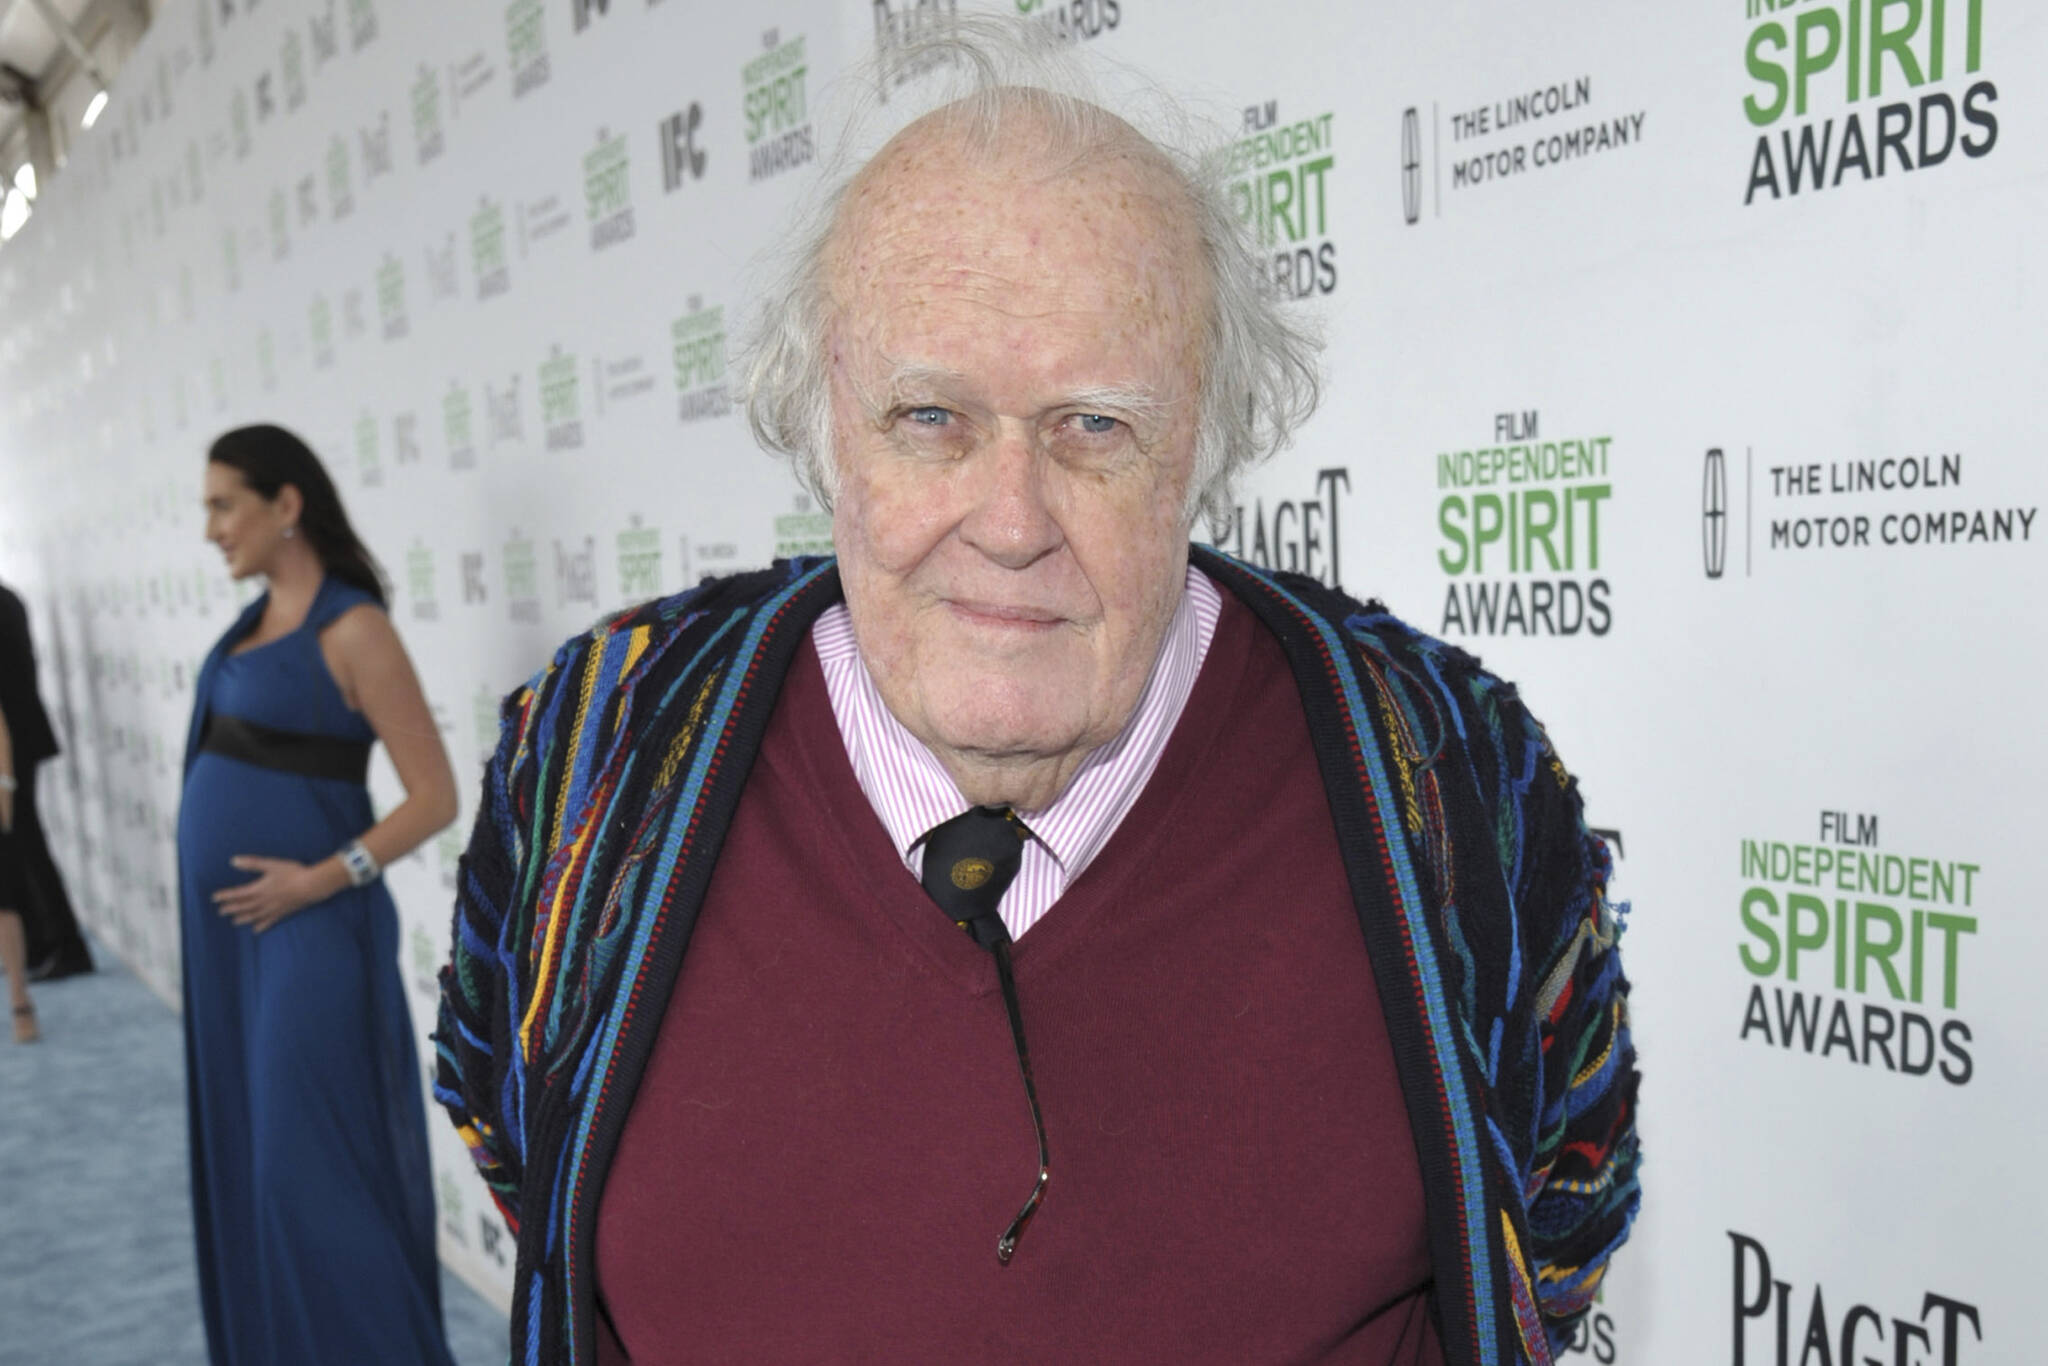 M. Emmet Walsh arrives at the 2014 Film Independent Spirit Awards, March 1, 2014, in Santa Monica, Calif. Walsh, the character actor who brought his unmistakable face and unsettling presence to films including “Blood Simple” and “Blade Runner,” died Tuesday, March 19, 2024, at age 88, his manager said Wednesday. (Photo by John Shearer/Invision/AP, File)